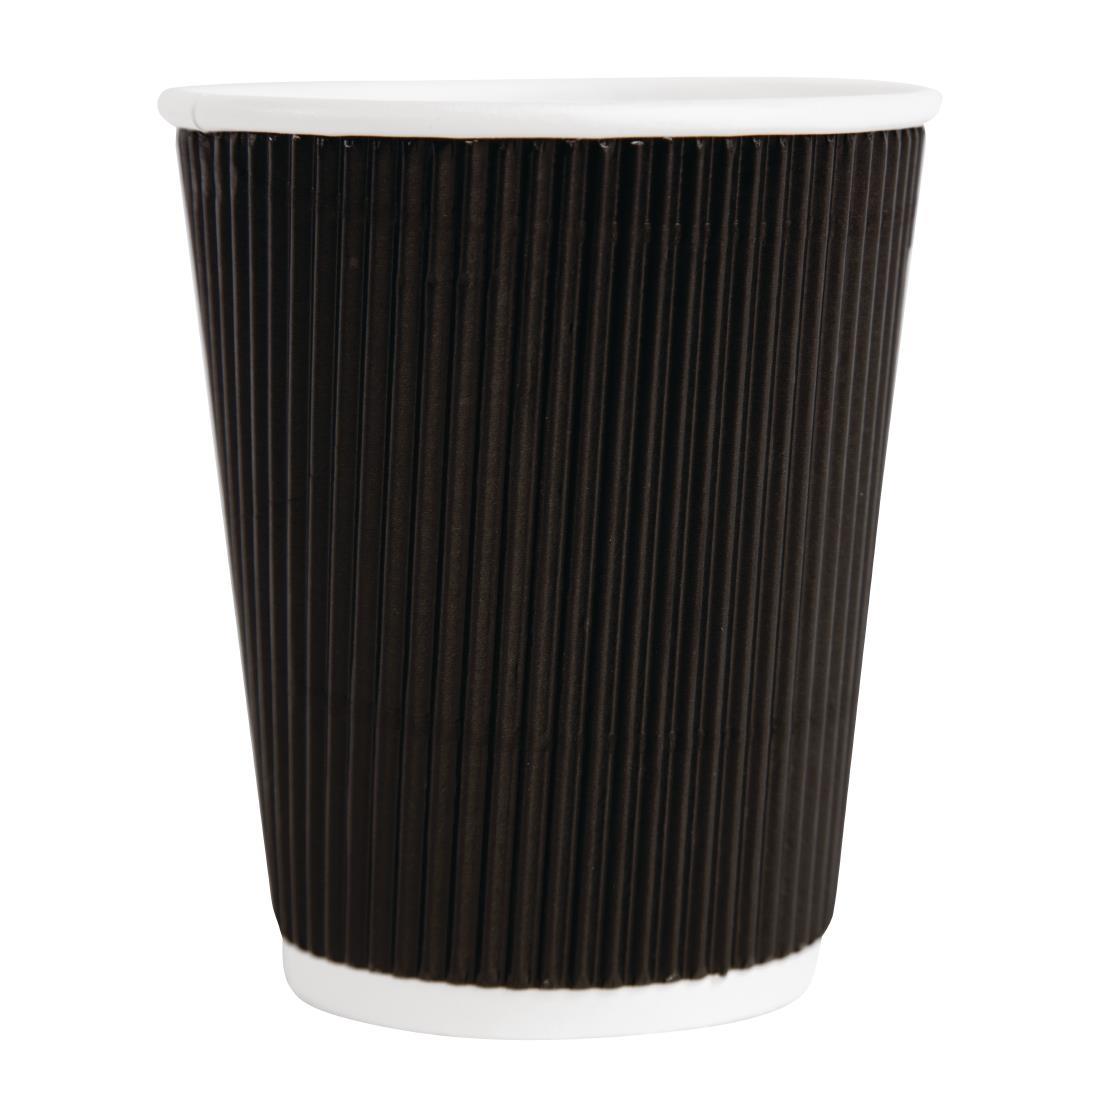 Fiesta Recyclable Coffee Cups Ripple Wall Black 225ml / 8oz (Pack of 25) - CM540  - 2